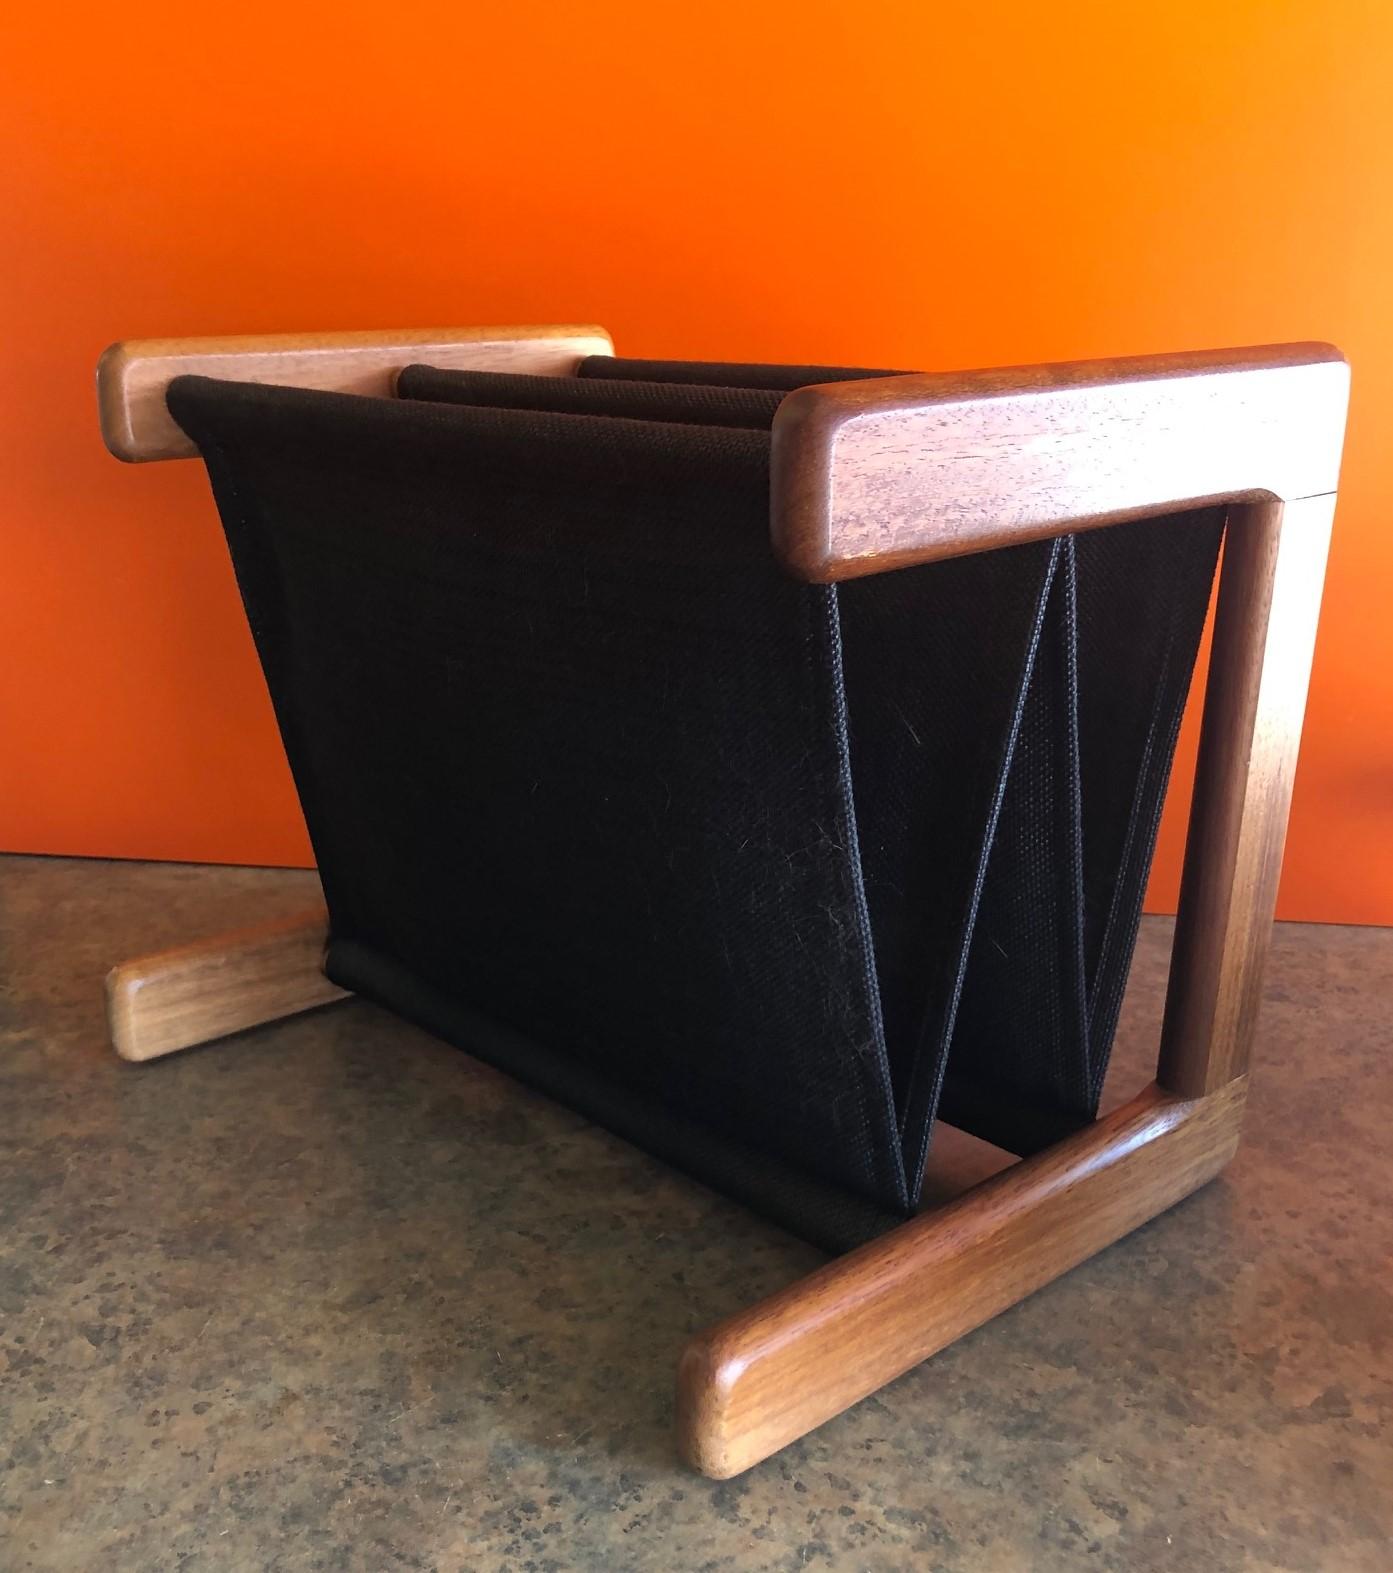 Danish modern linen and teak double magazine rack, circa 1970s. A solid teak frame and chocolate linen inserts make this a very attractive and functional magazine rack for any MCM room.